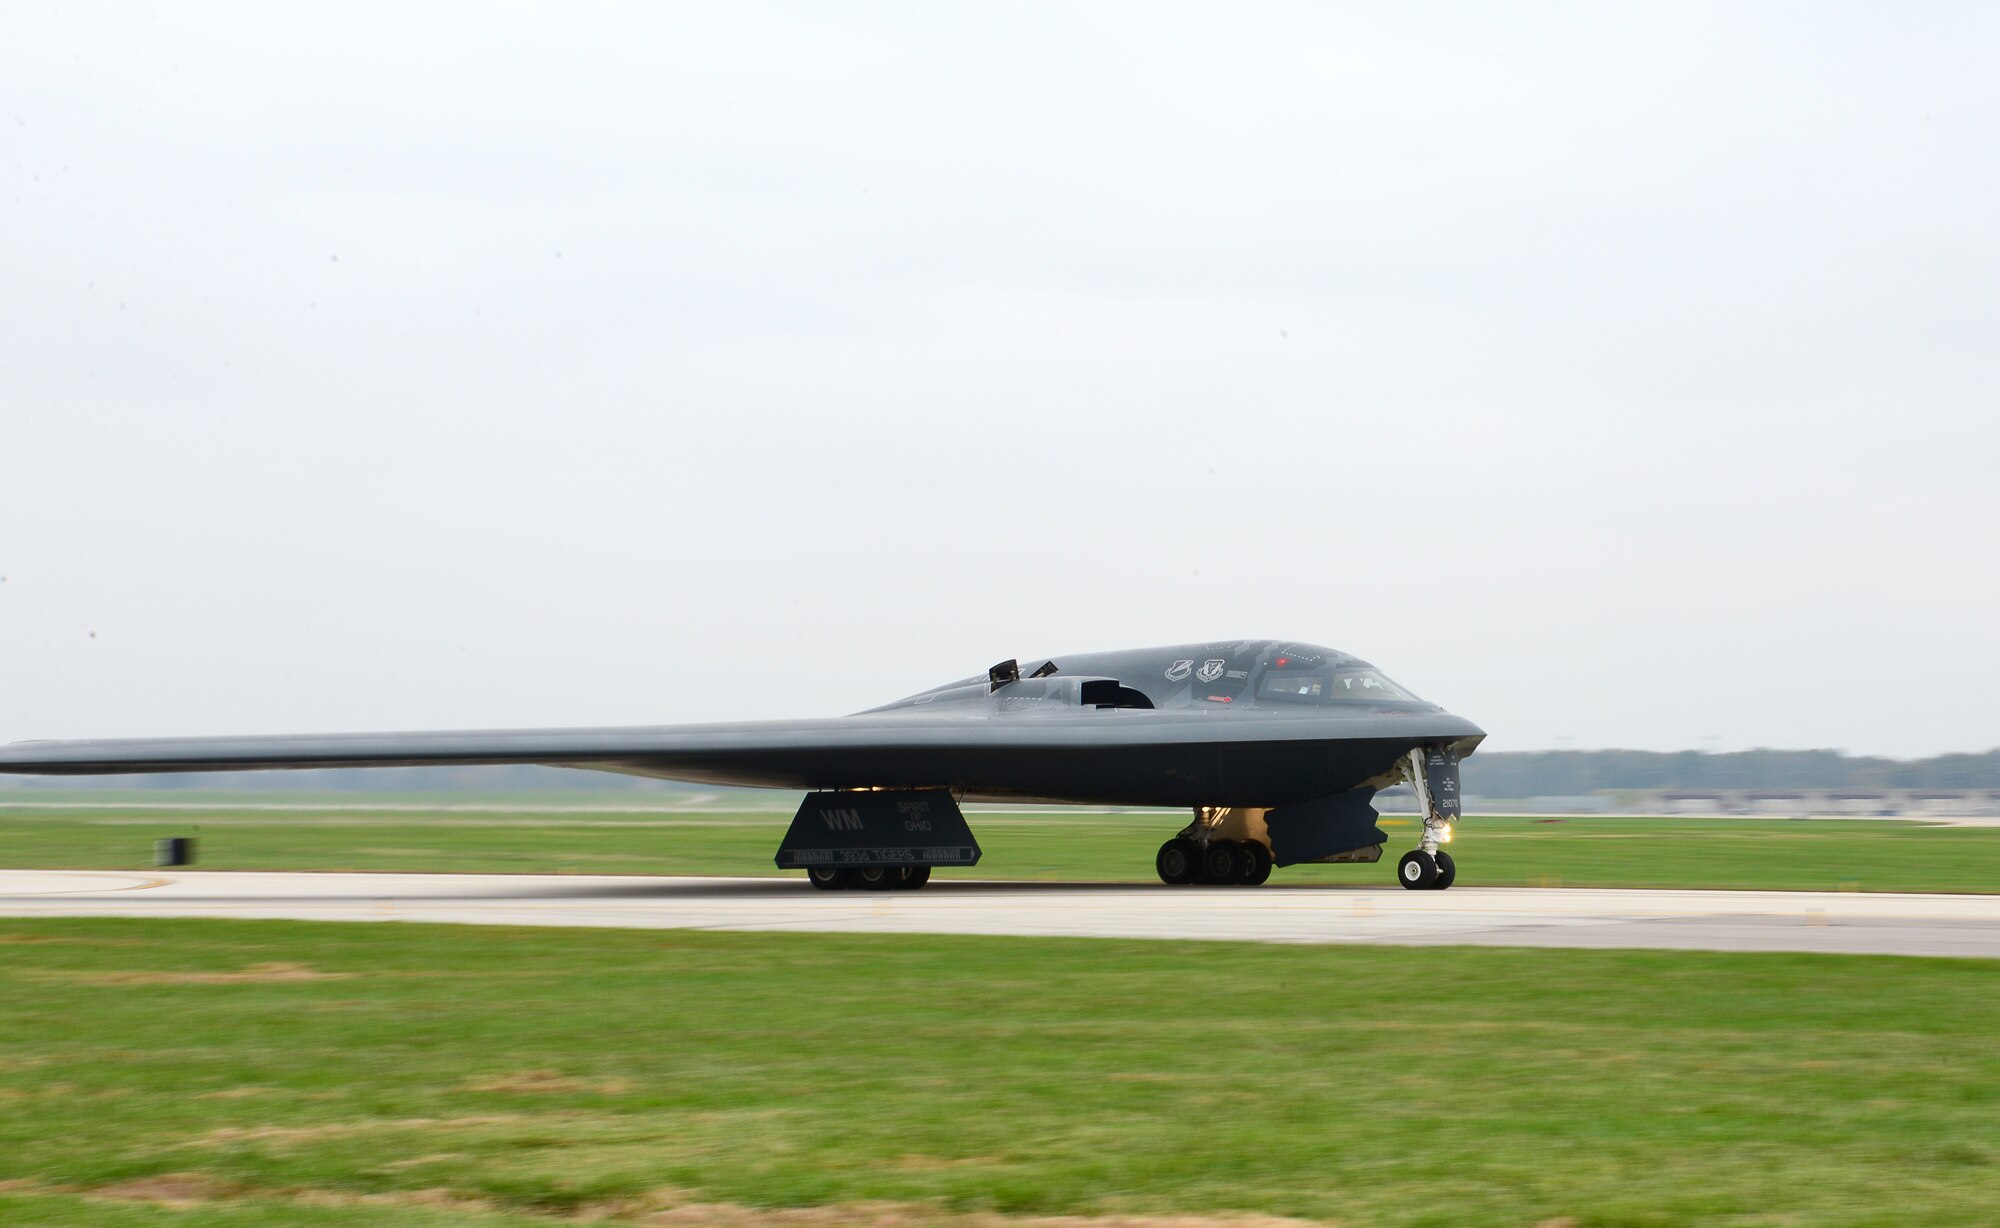 A U.S. Air Force B-2 Spirit assigned to Air Force Global Strike Command (AFGSC) prepare to take off from the runway at Whiteman Air Force Base, Mo., Oct 30, 2016, during exercise Global Thunder 17. AFGSC supports U.S. Strategic Command's (USSTRATCOM) global strike and nuclear deterrence missions by providing strategic assets, including bombers like the B-52 and B-2, to ensure a safe, secure, effective and ready deterrent force. Global Thunder is an annual training event that assesses command and control functionality in all USSTRATCOM mission areas and affords component commands a venue to evaluate their joint operational readiness.(U.S. Air Force photo by Tech. Sgt. Andy Kin)